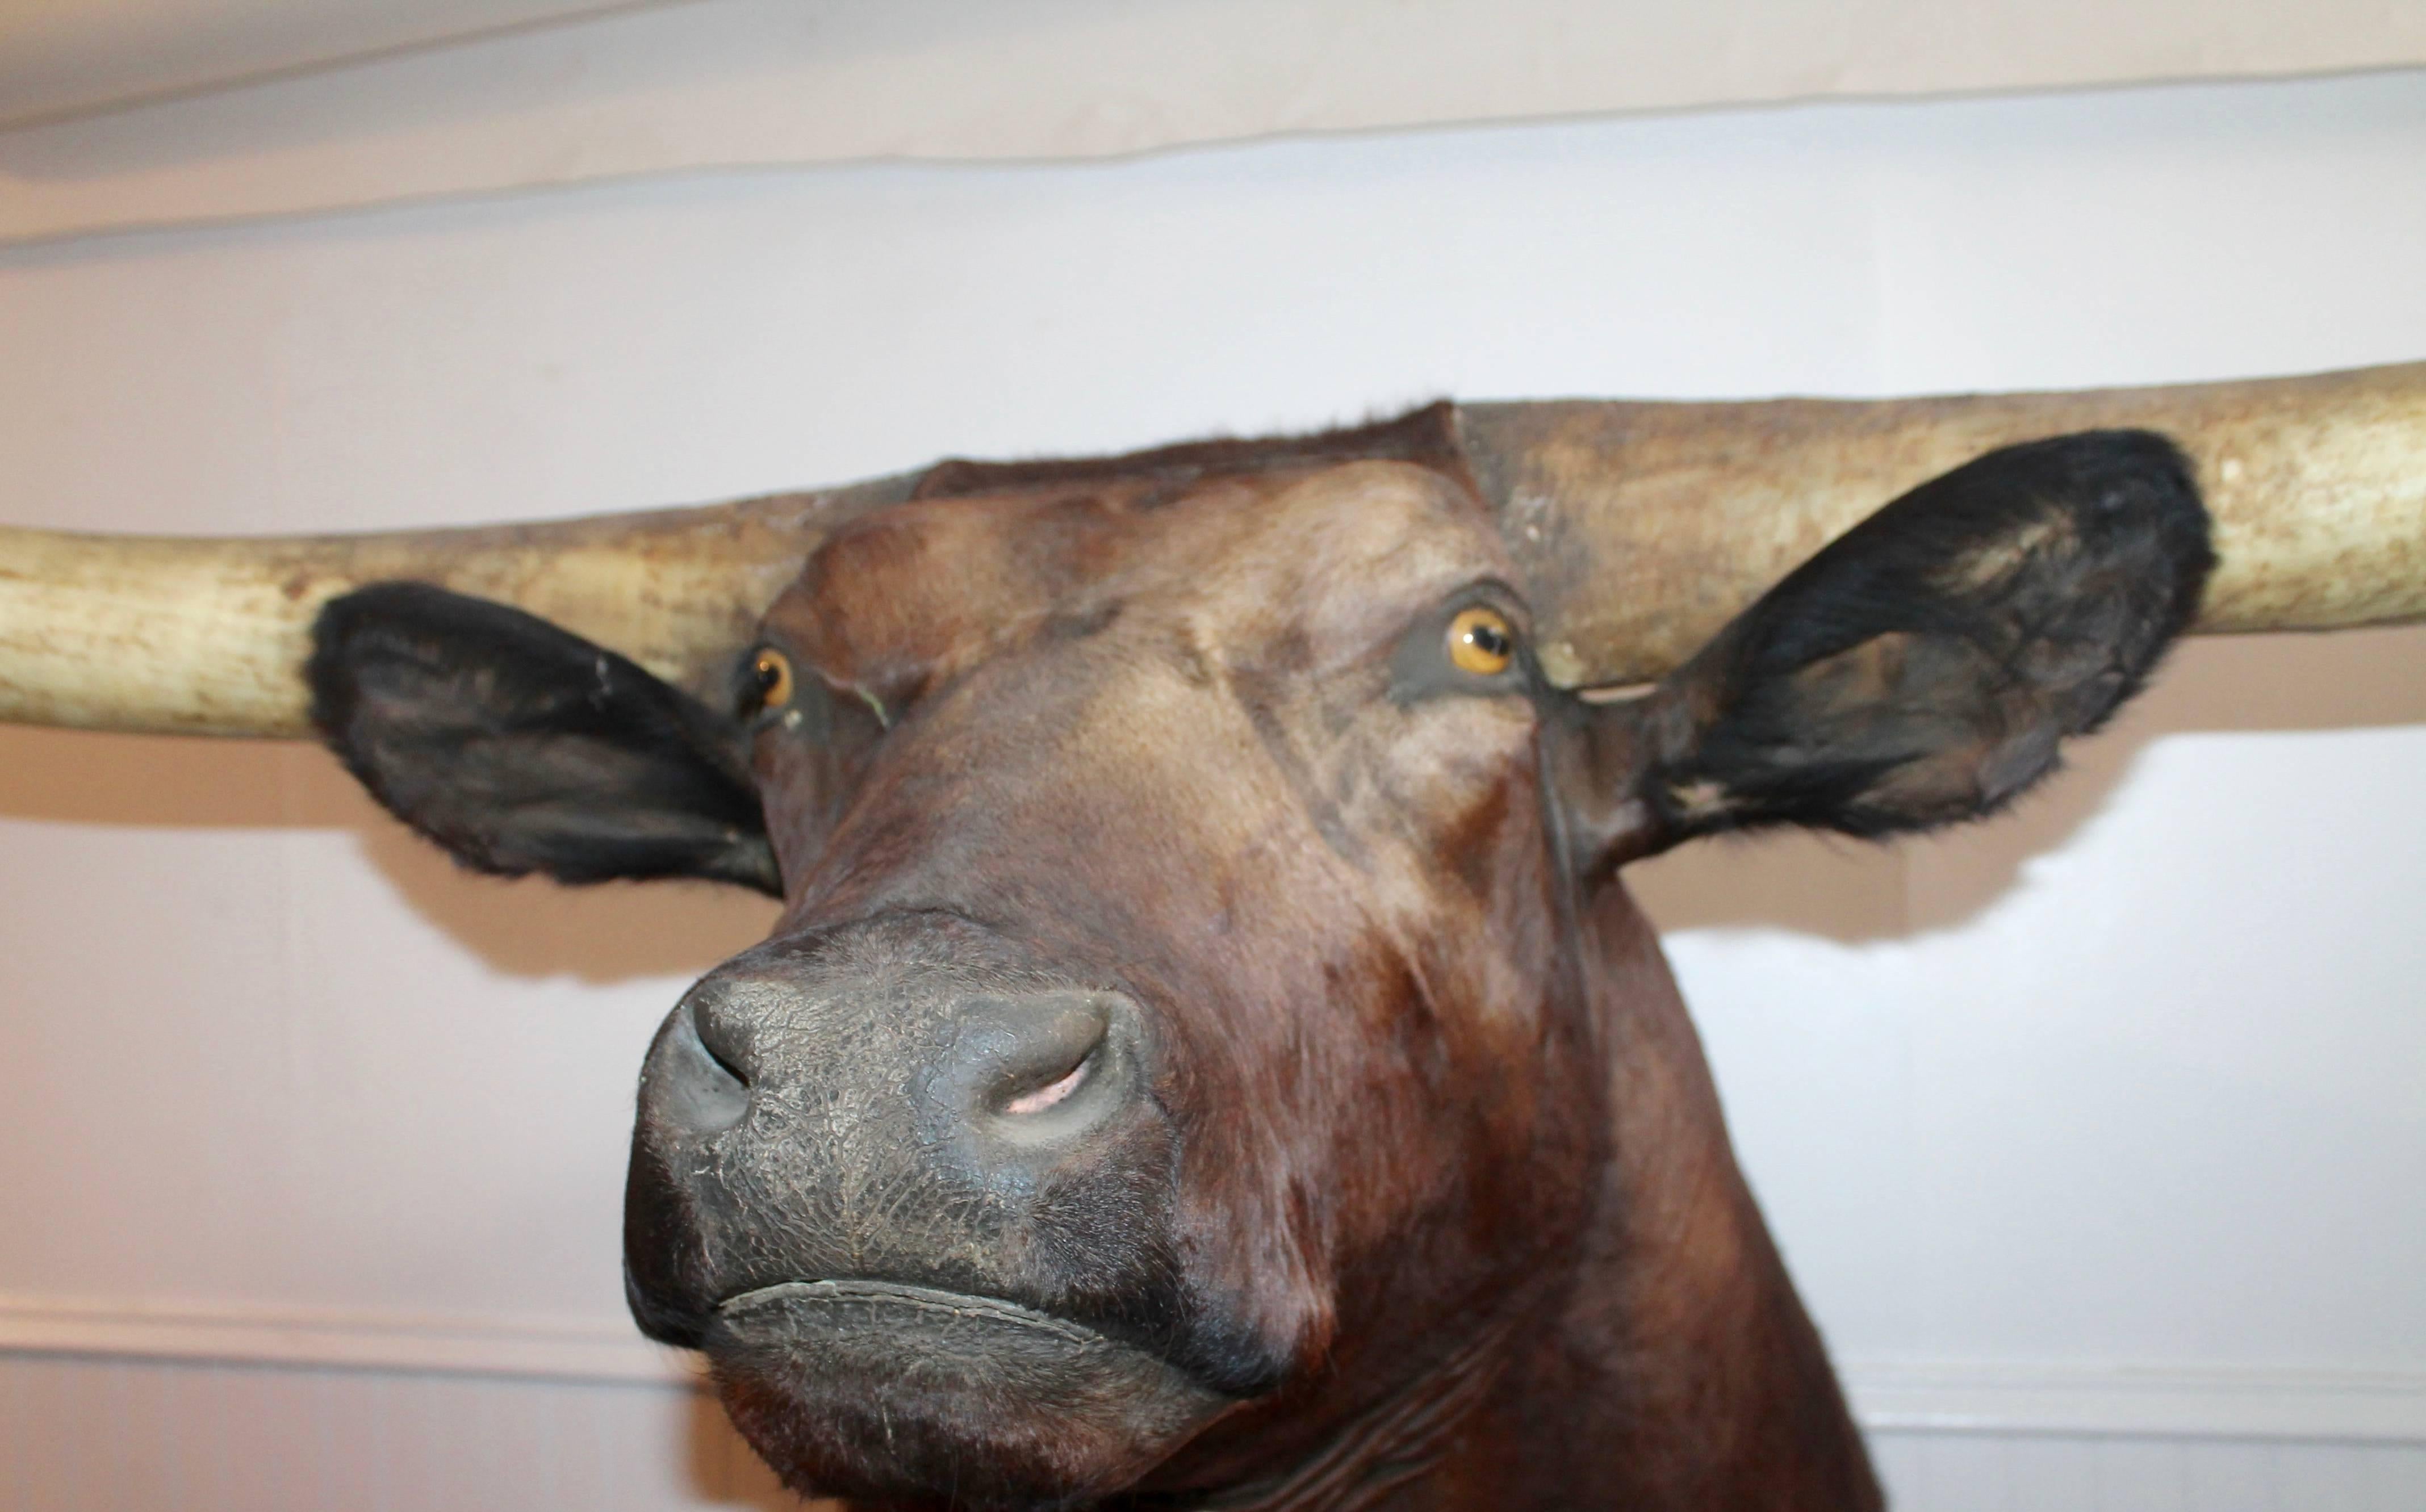 This was found on a Ranch in Texas and is signed Bud Jones Taxidermy from Texas and dated 1969. The condition is very good.